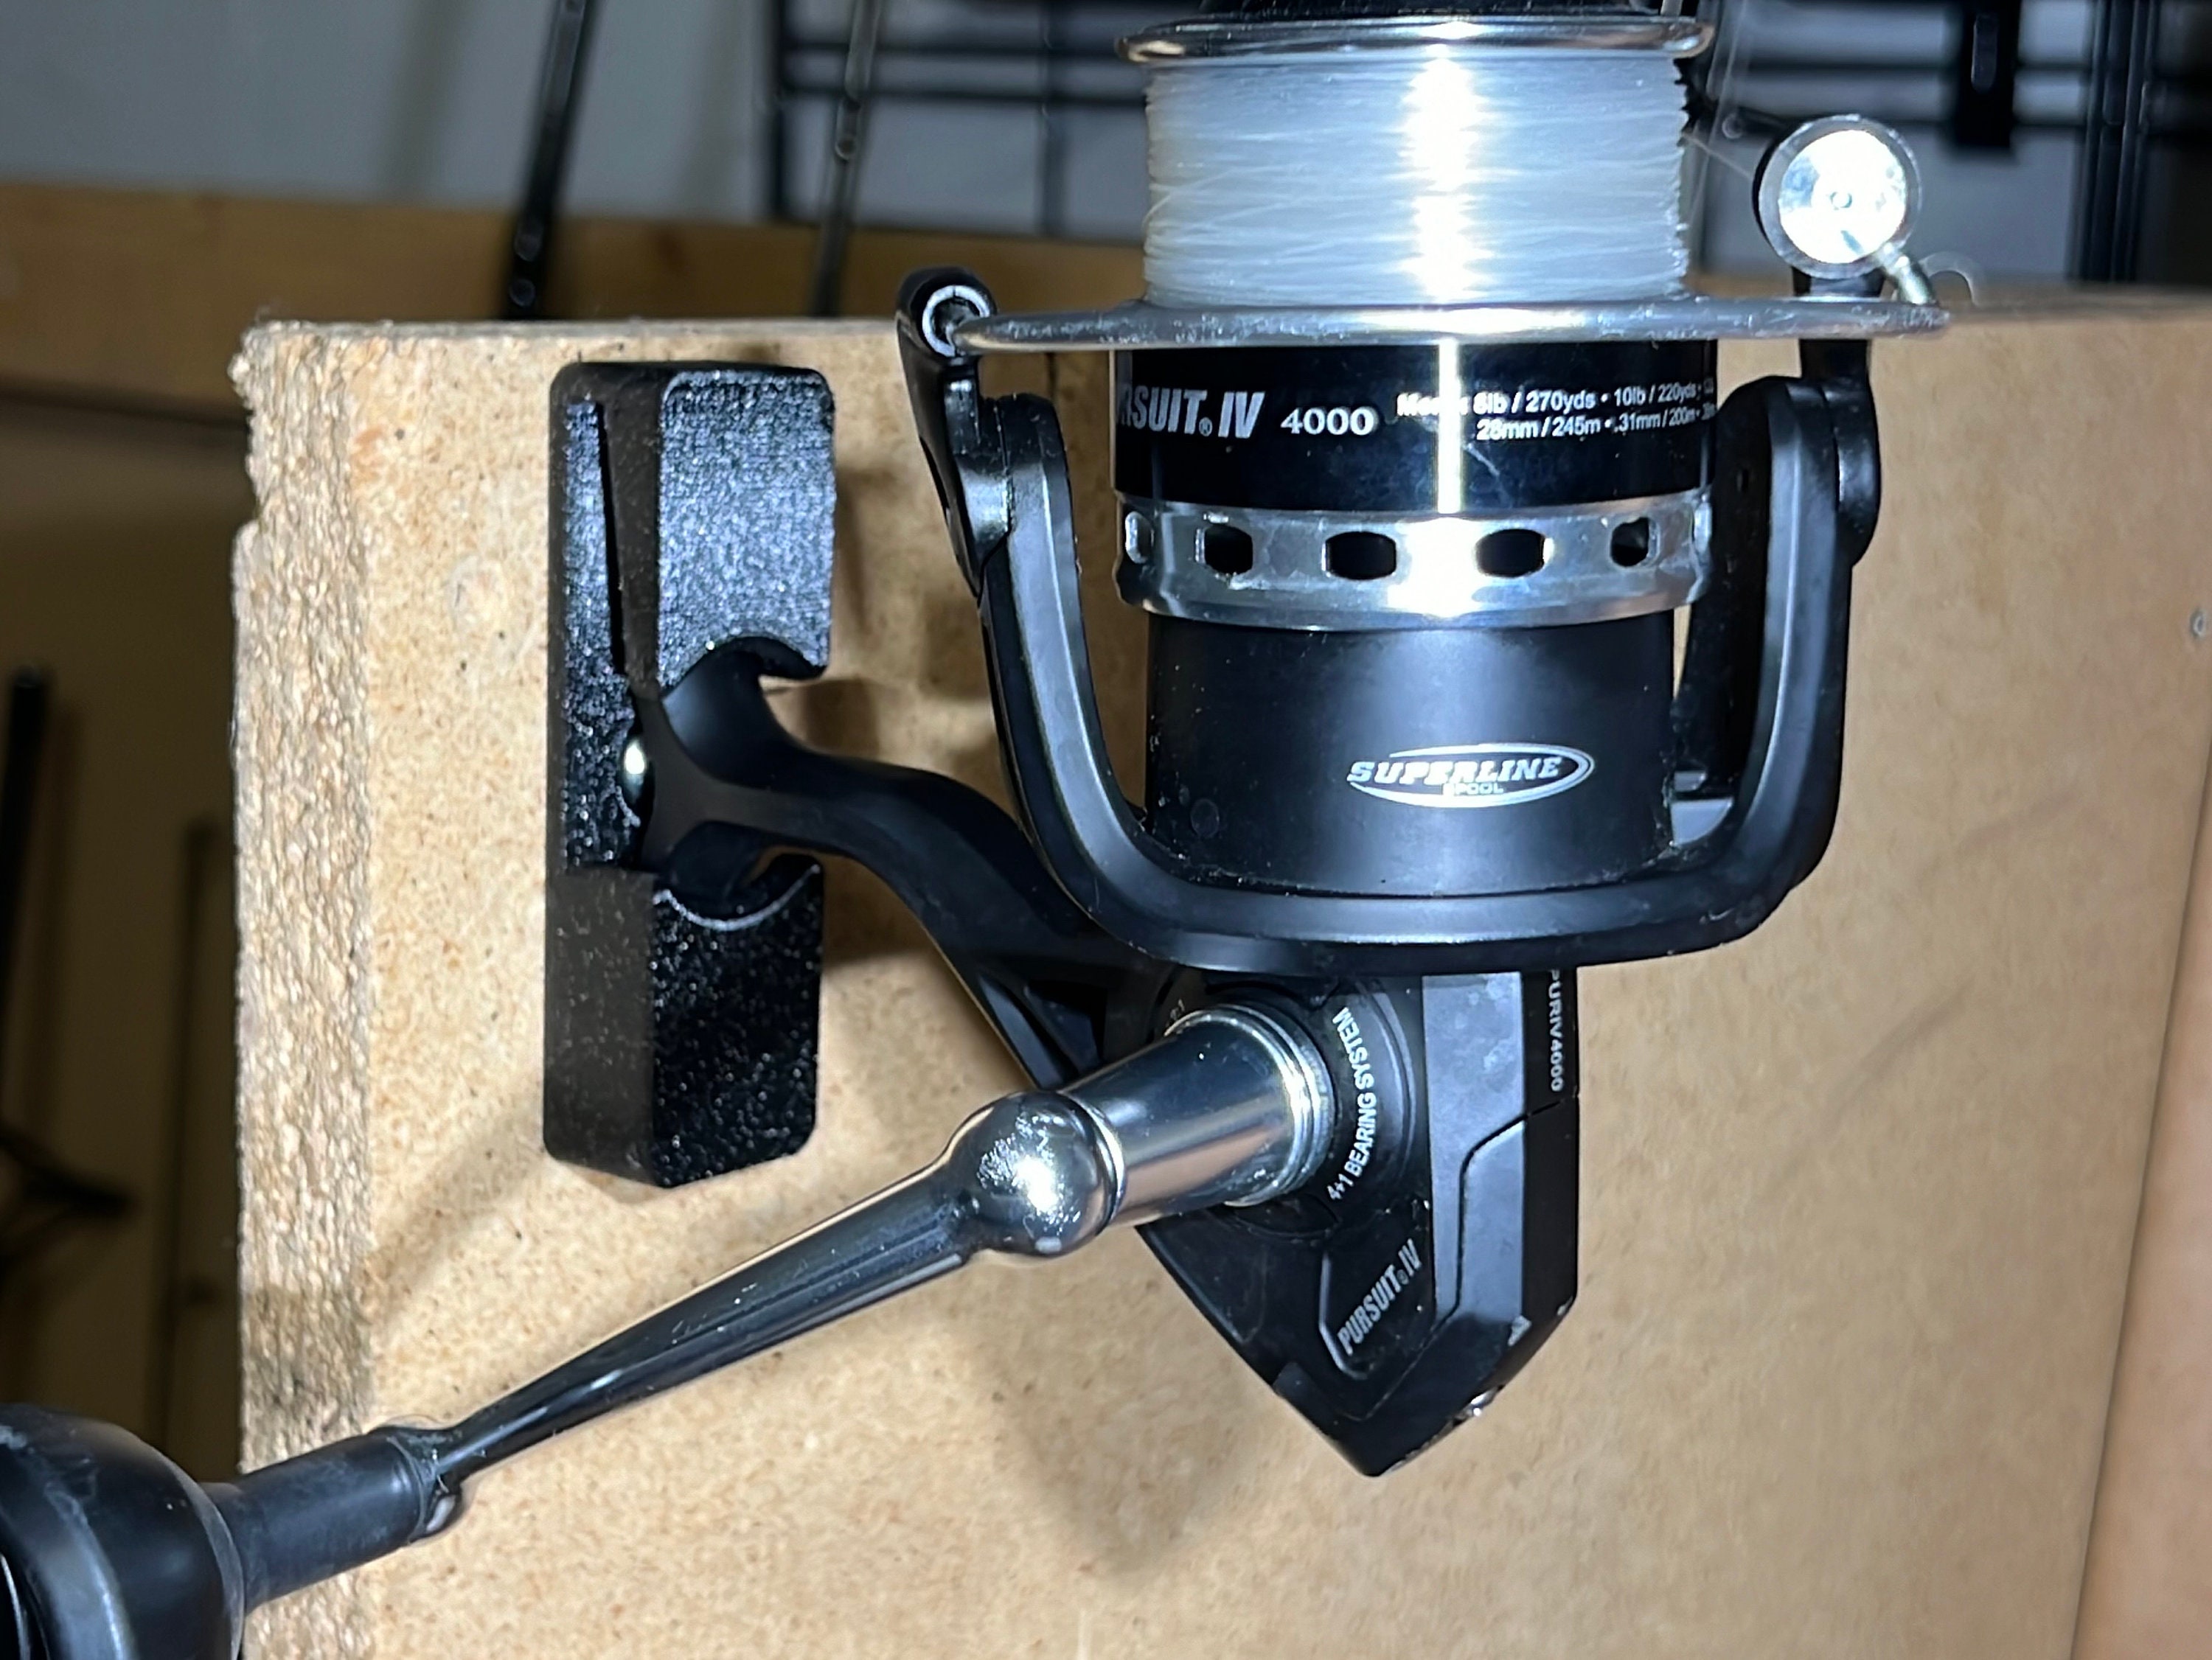 SET OF X4 Fishing Reel Wall Mounts for Most 4K to 10K Series Spinning Reels  -  Ireland